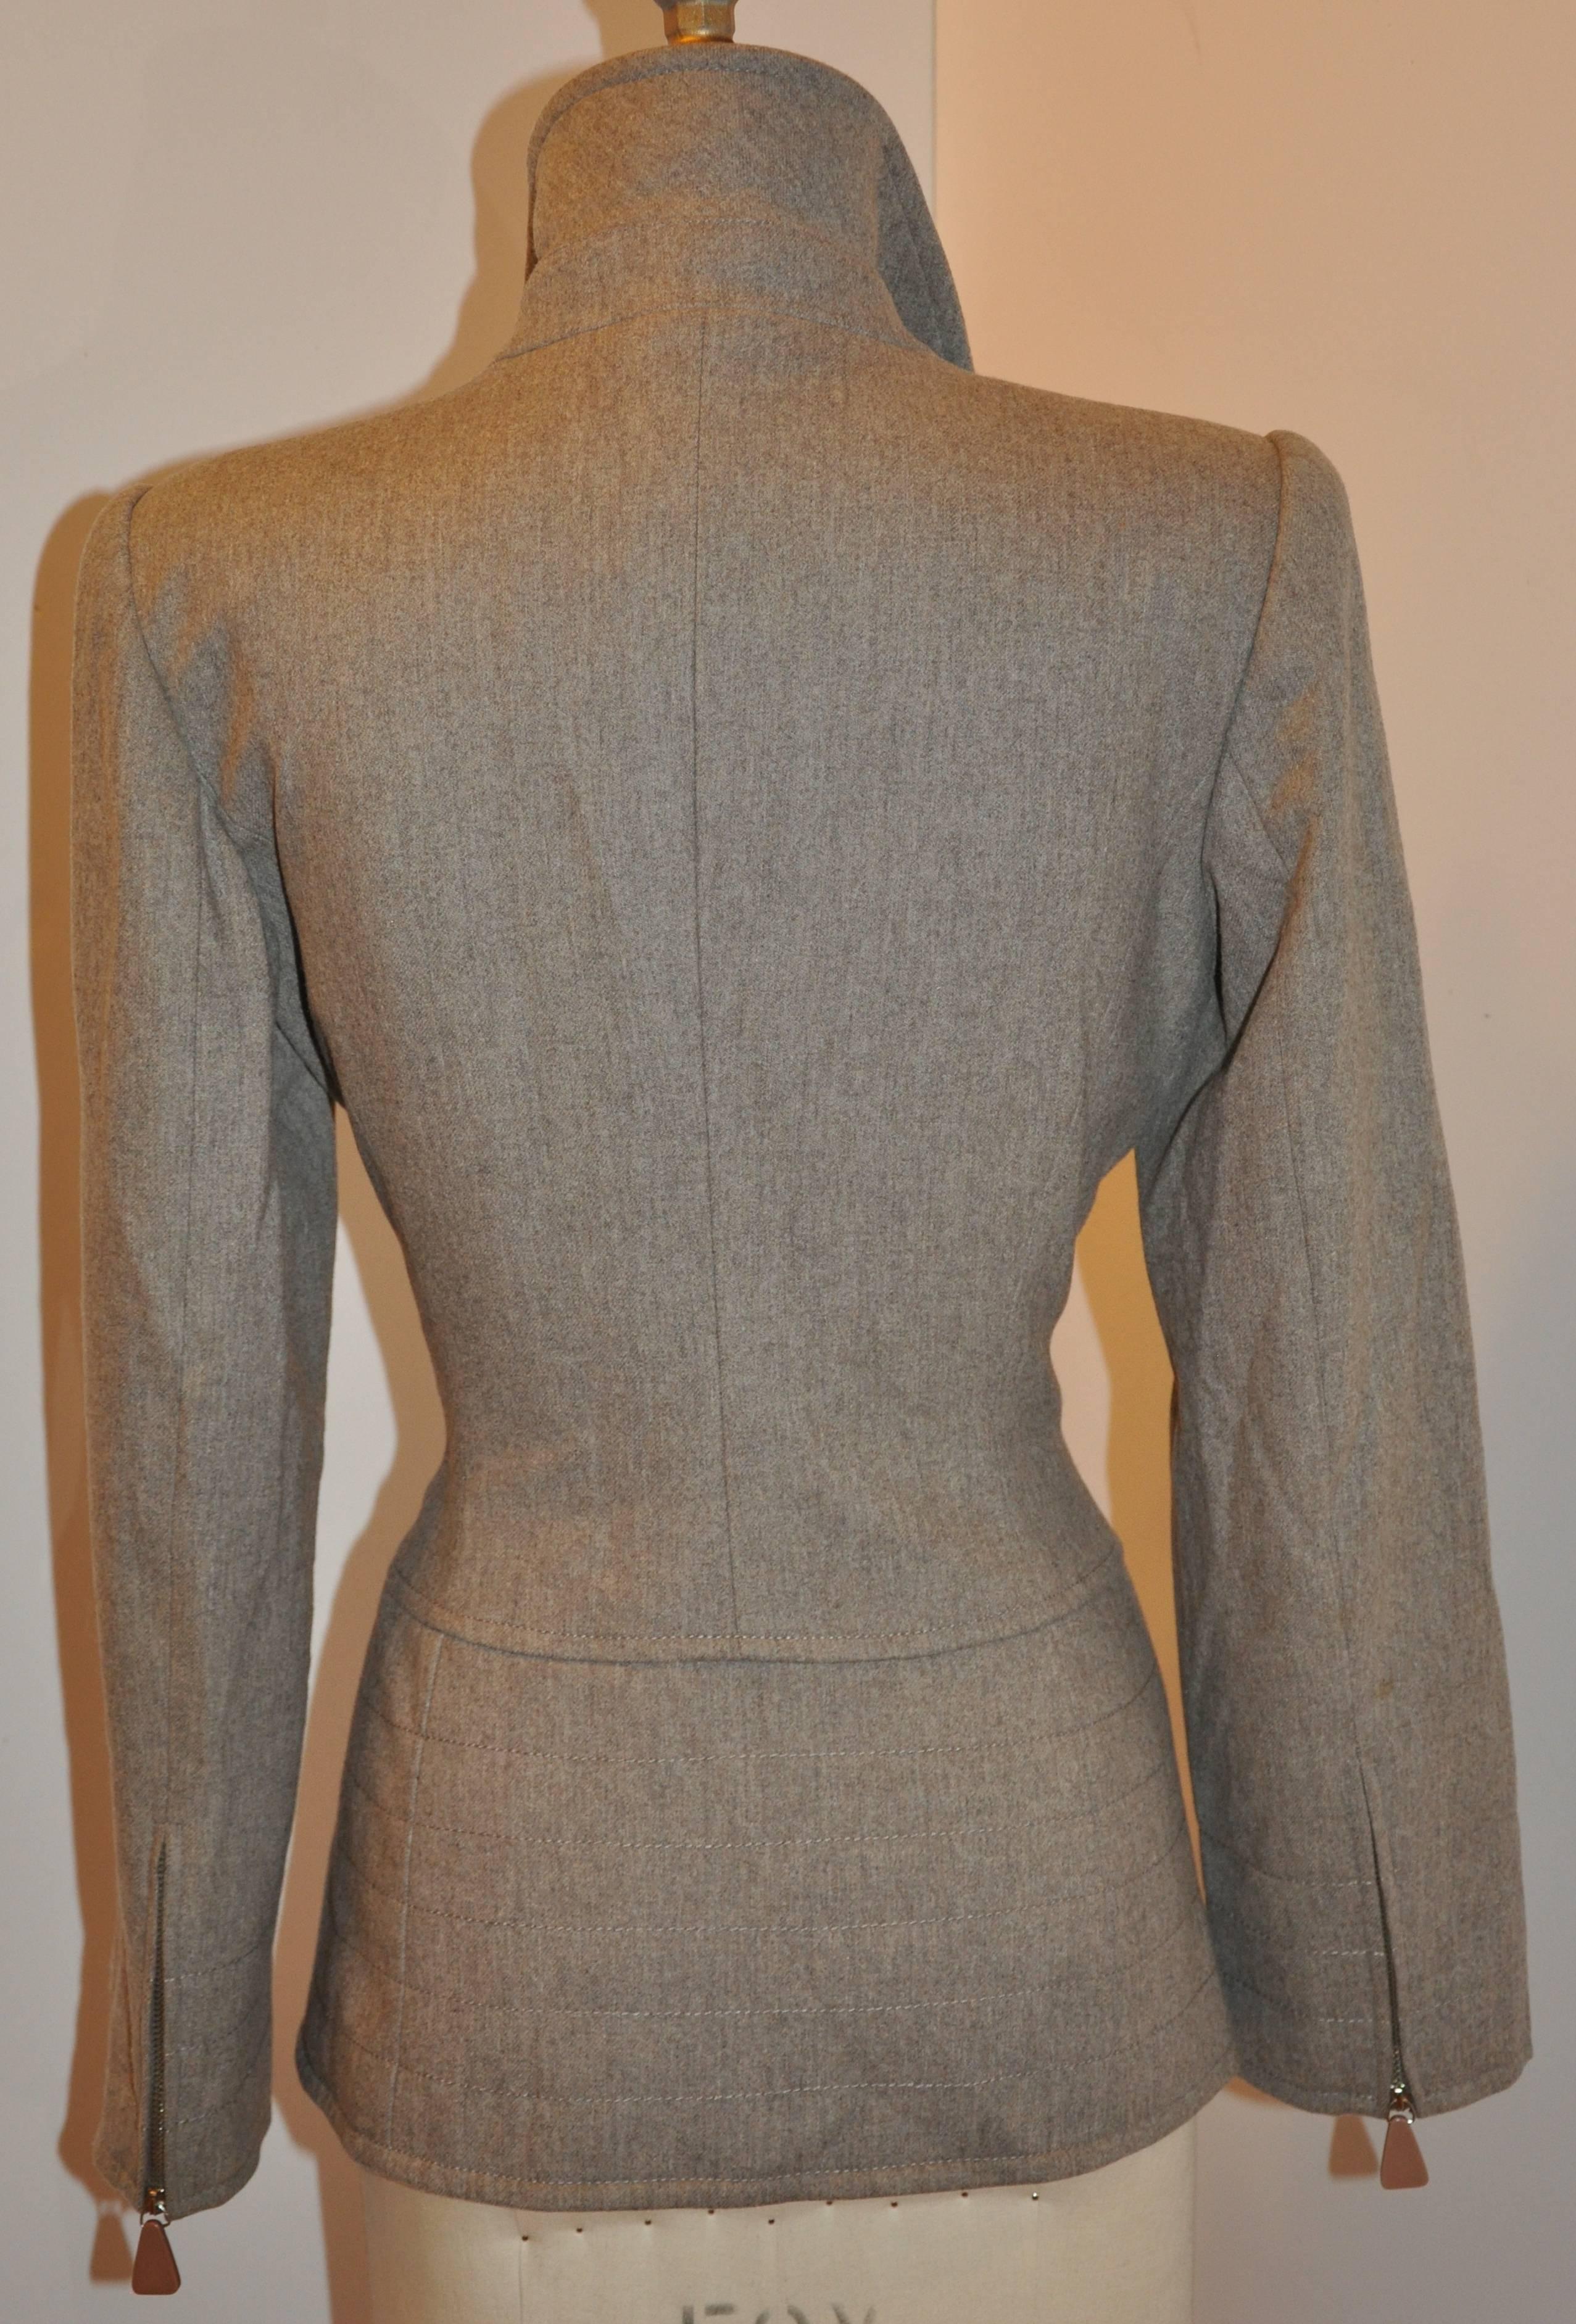        Claude Montana brown-taupe high-collared zippered-front jacket is detailed with top stitching along the lapels, sleeve's cuff, as well as the lower bodice near the hemline. The front zipper is the length of the lower bodice which measures 8